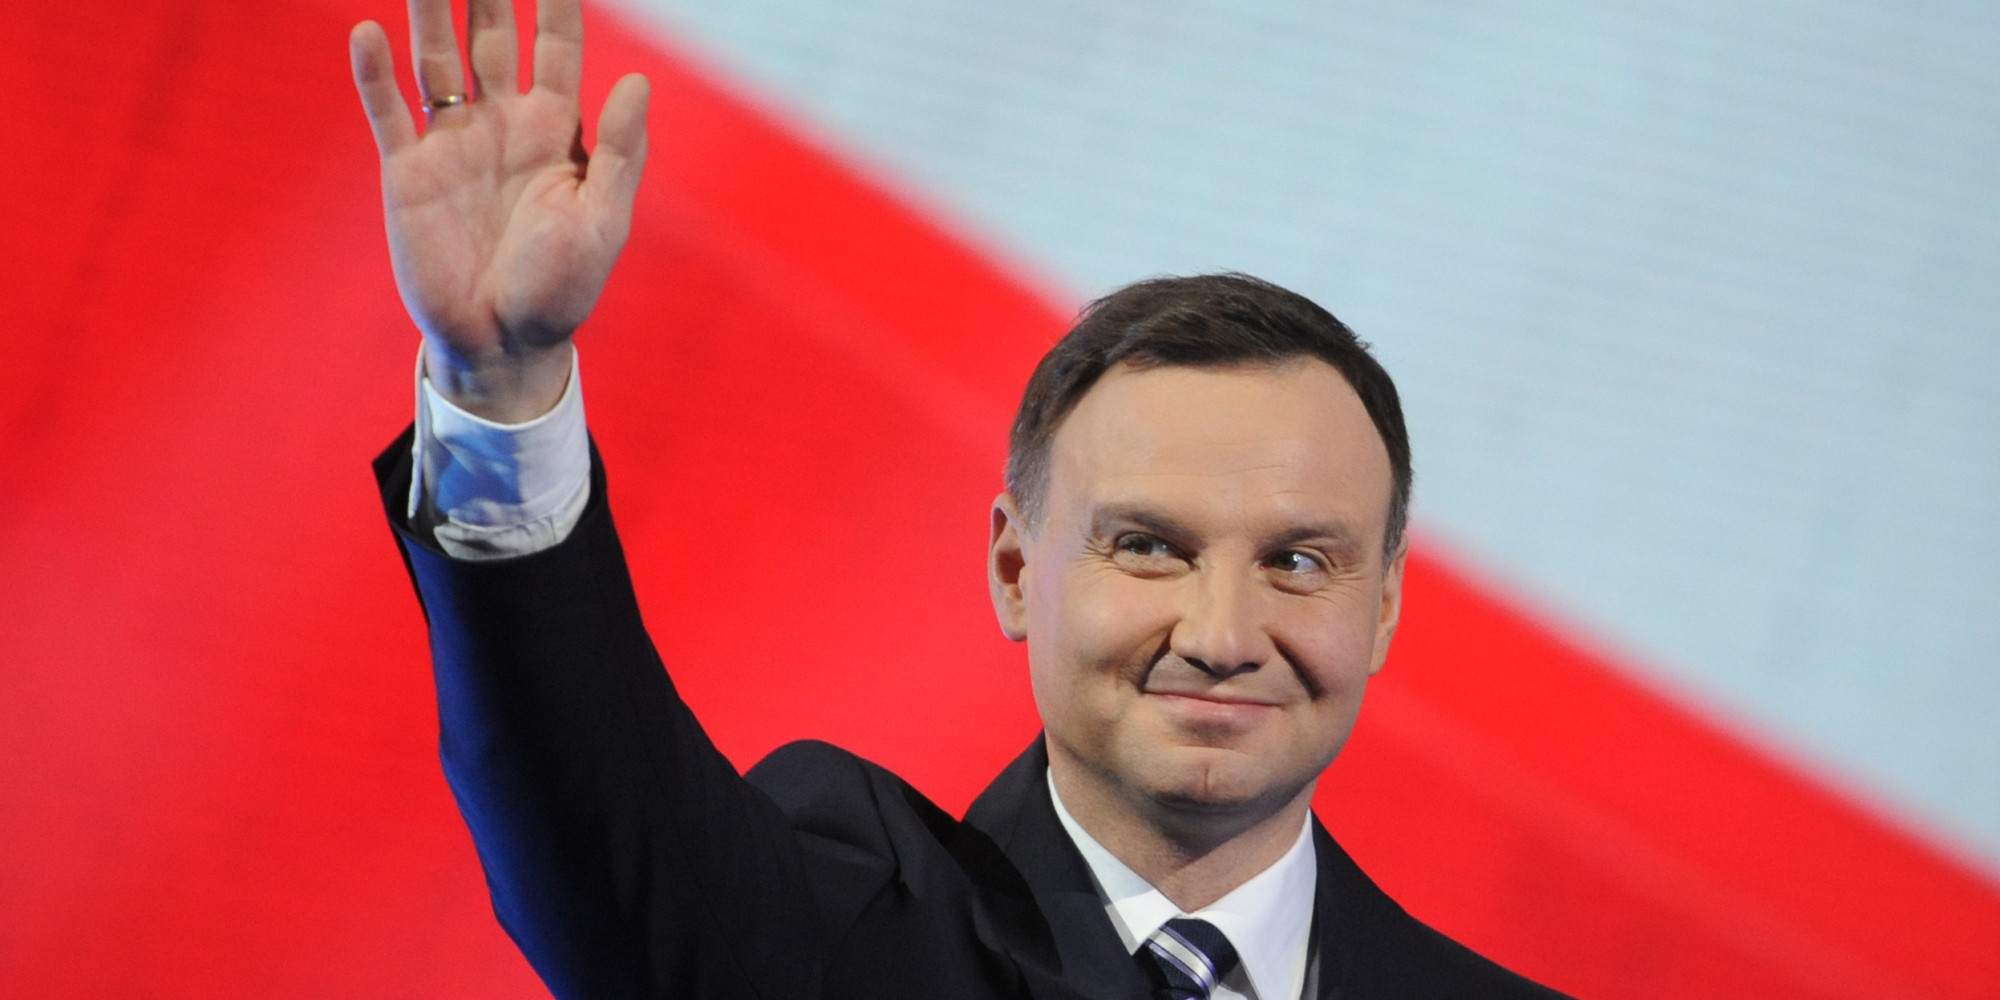 ANDRZEJ DUDA DID NOT SIGN AN UPDATED LAW ON THE SOCIAL INSURANCE SYSTEM